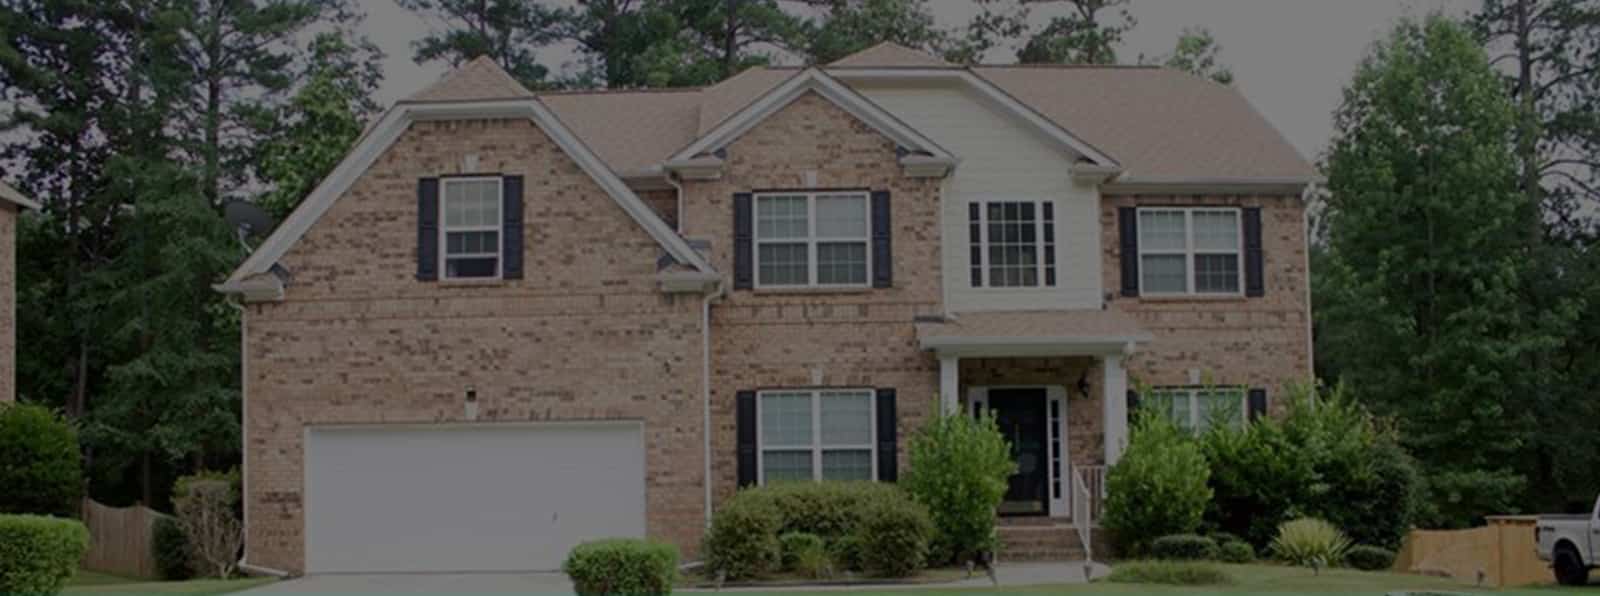 Property for sale in Norcross